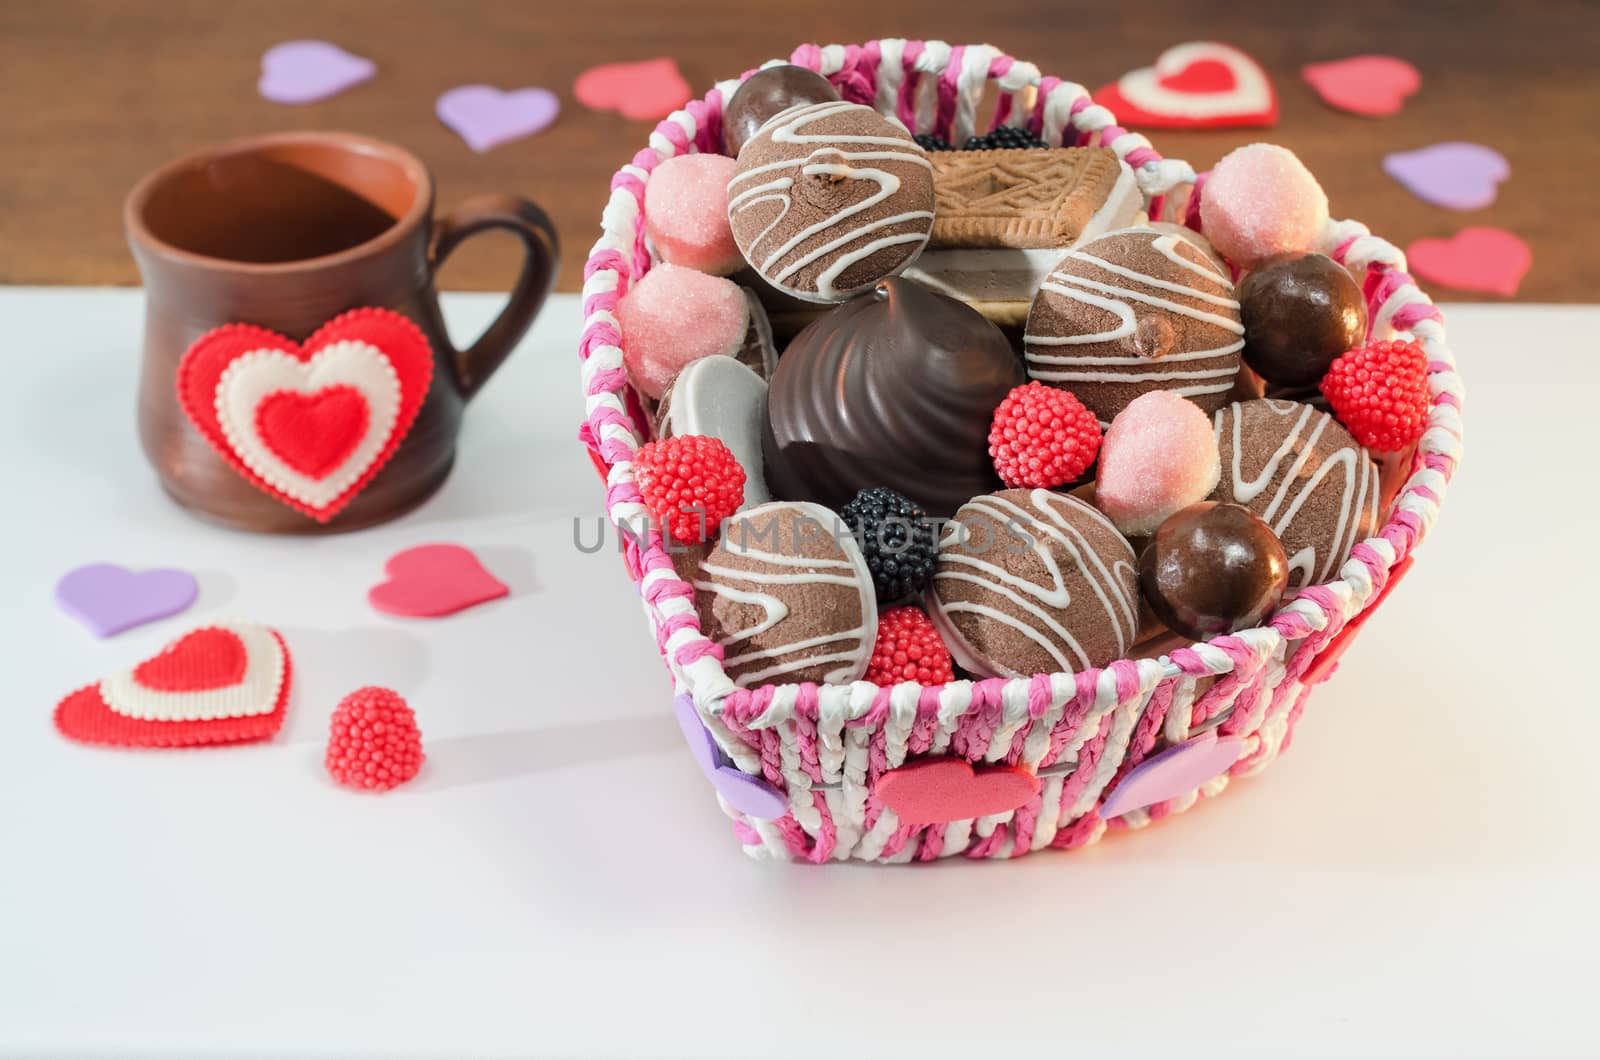 Basket with various sweets and biscuits on the table, decorative Valentine day heart by Gaina